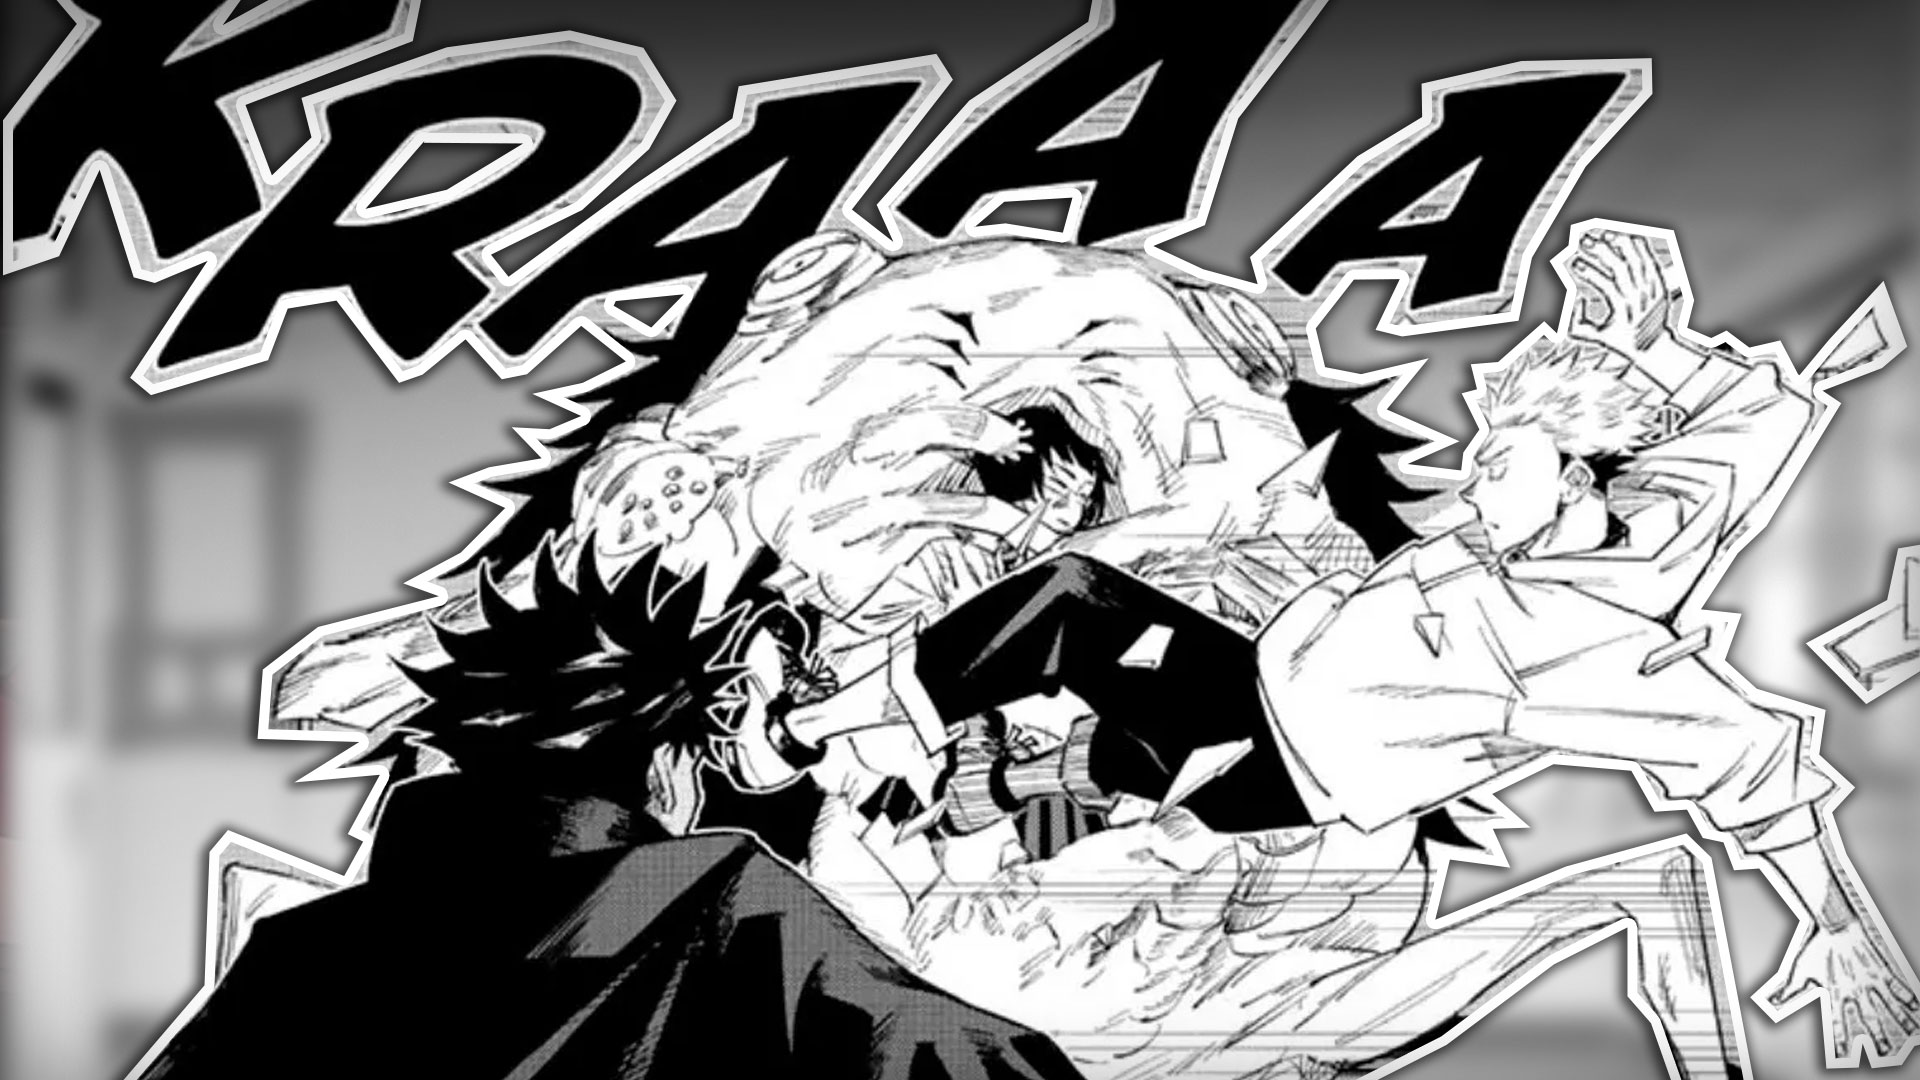 Jujutsu Kaisen Leakers Completely Ruin the Hype for the Series